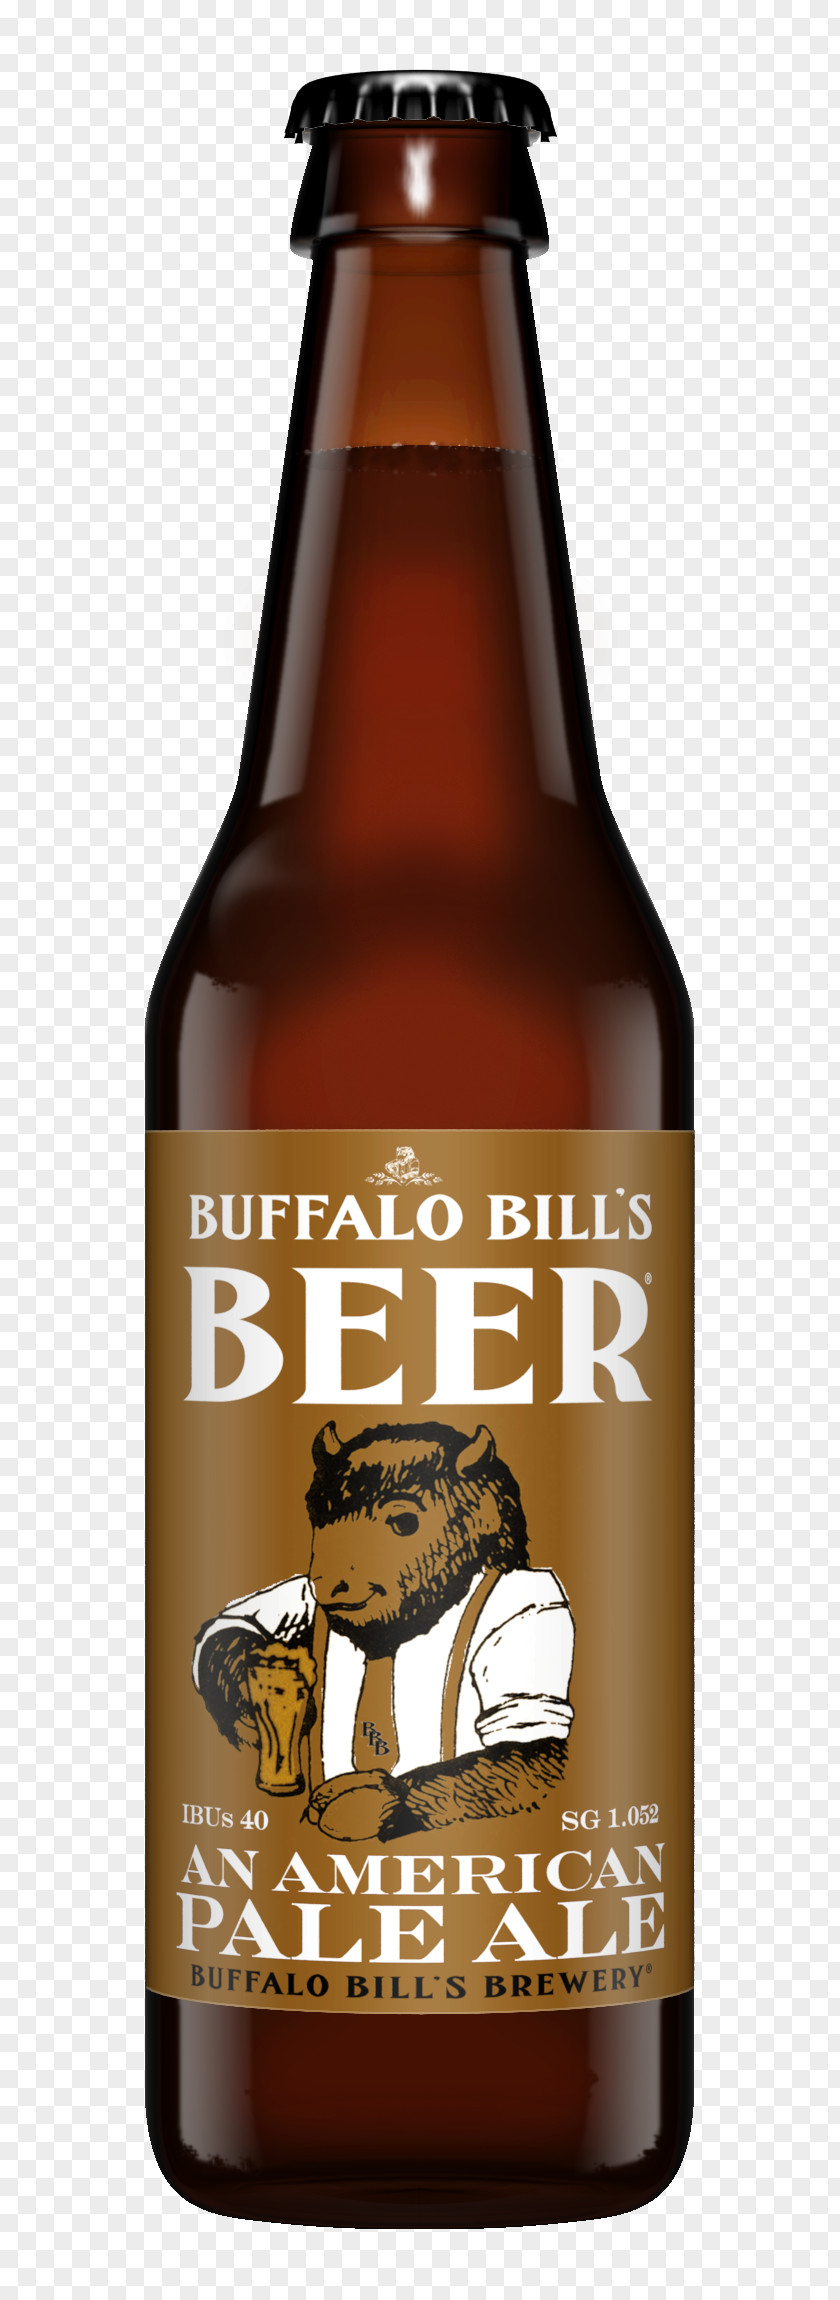 Beer Ale Bottle Lager Brewery PNG